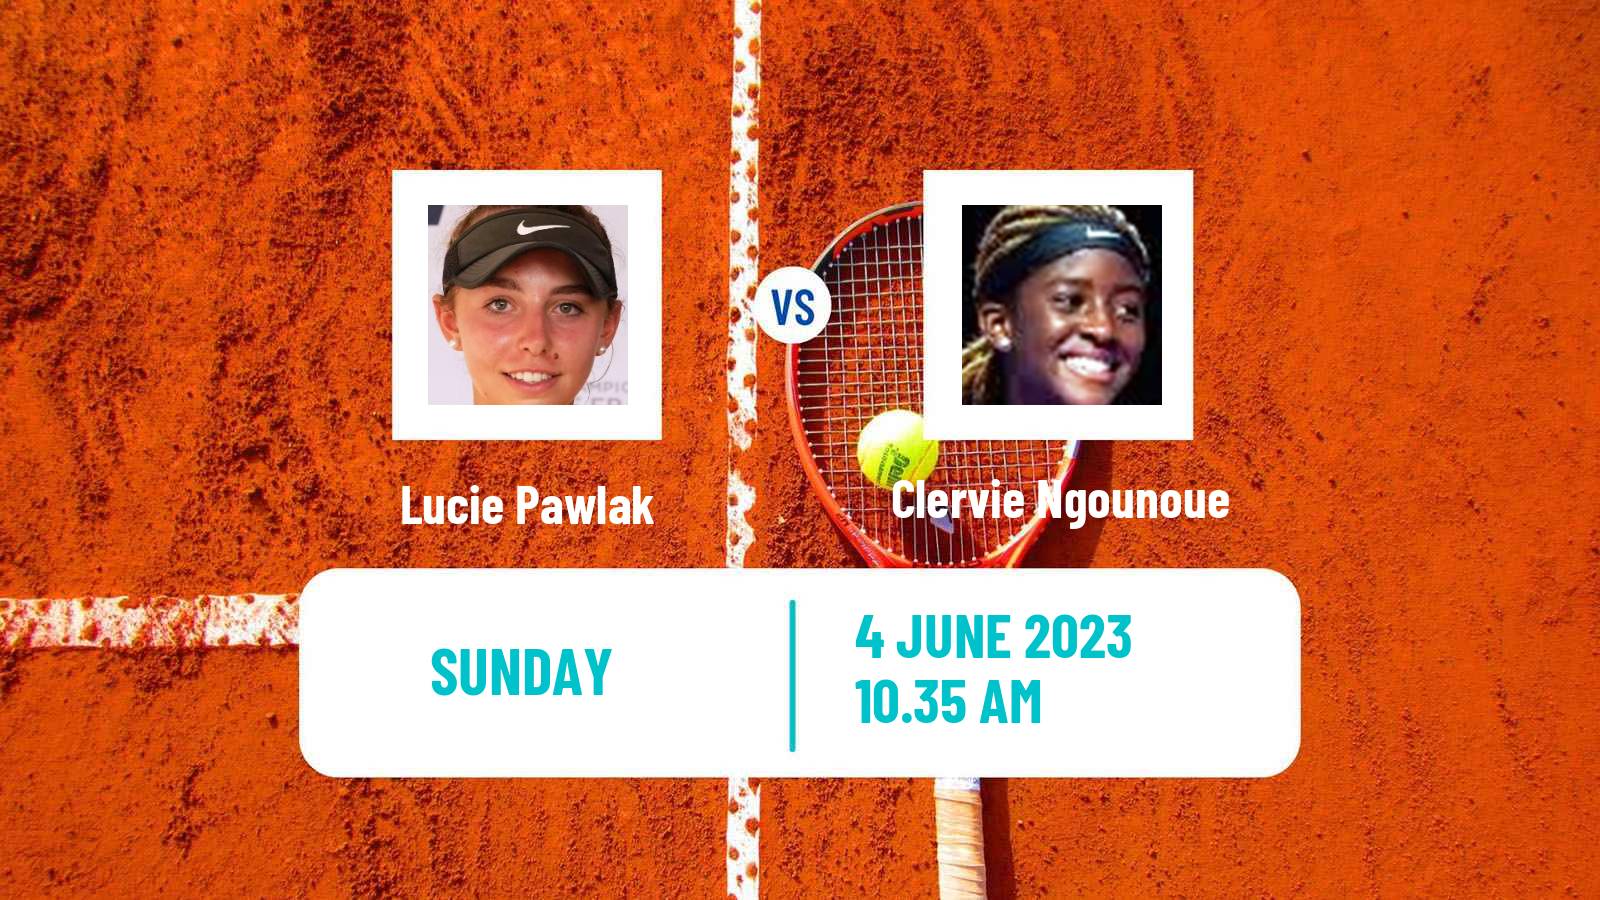 Tennis Girls Singles French Open Lucie Pawlak - Clervie Ngounoue